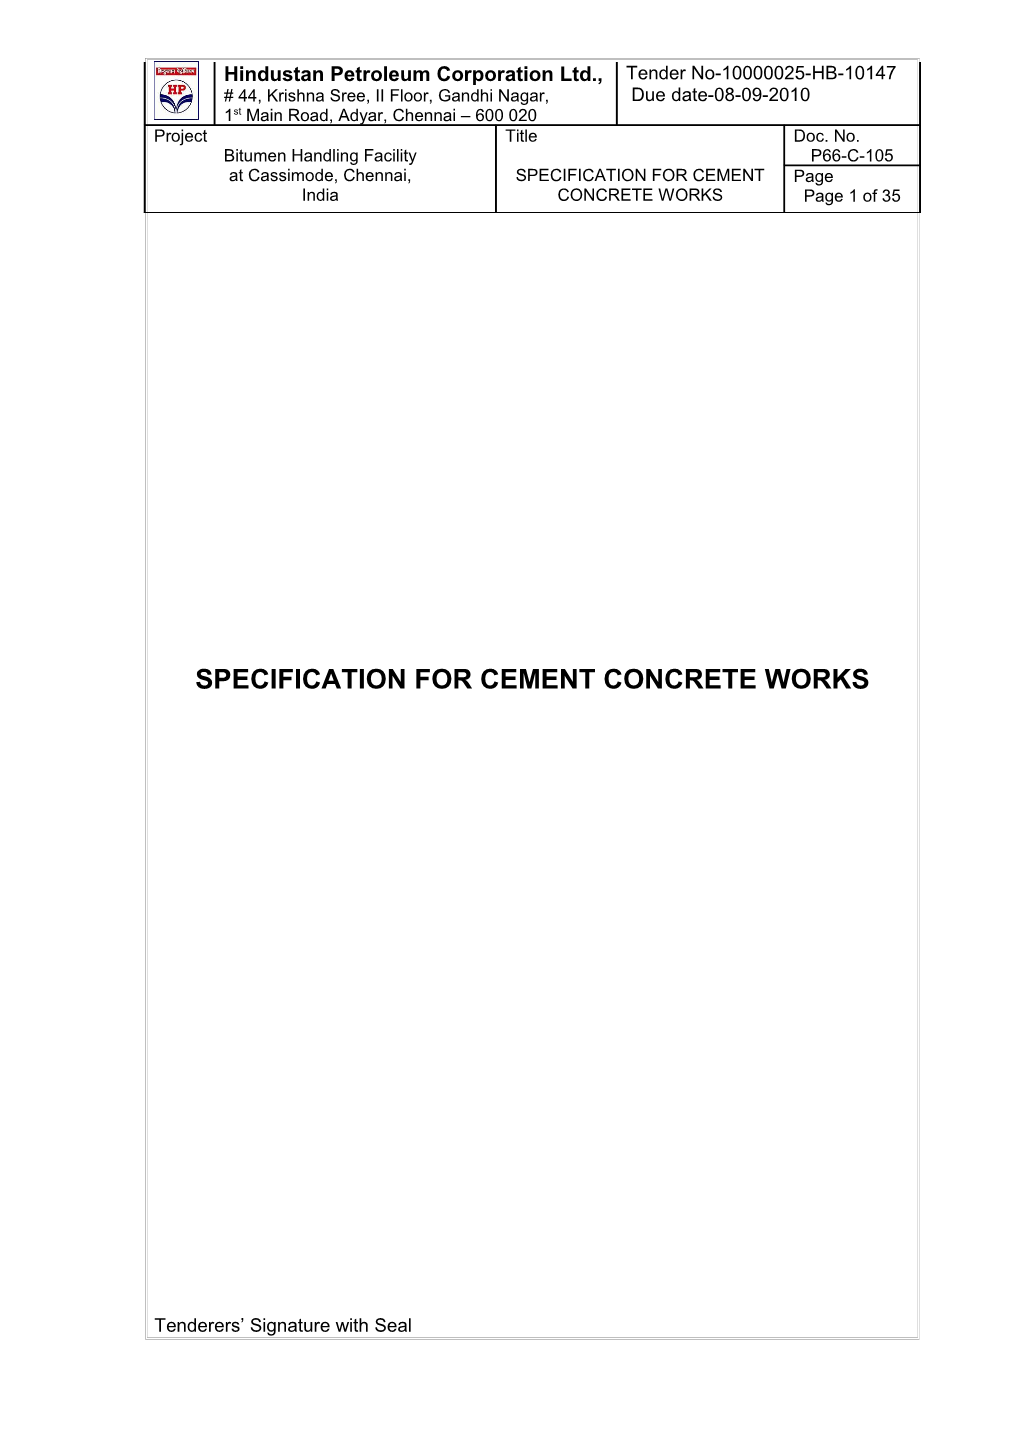 Specification for Cement Concrete Works